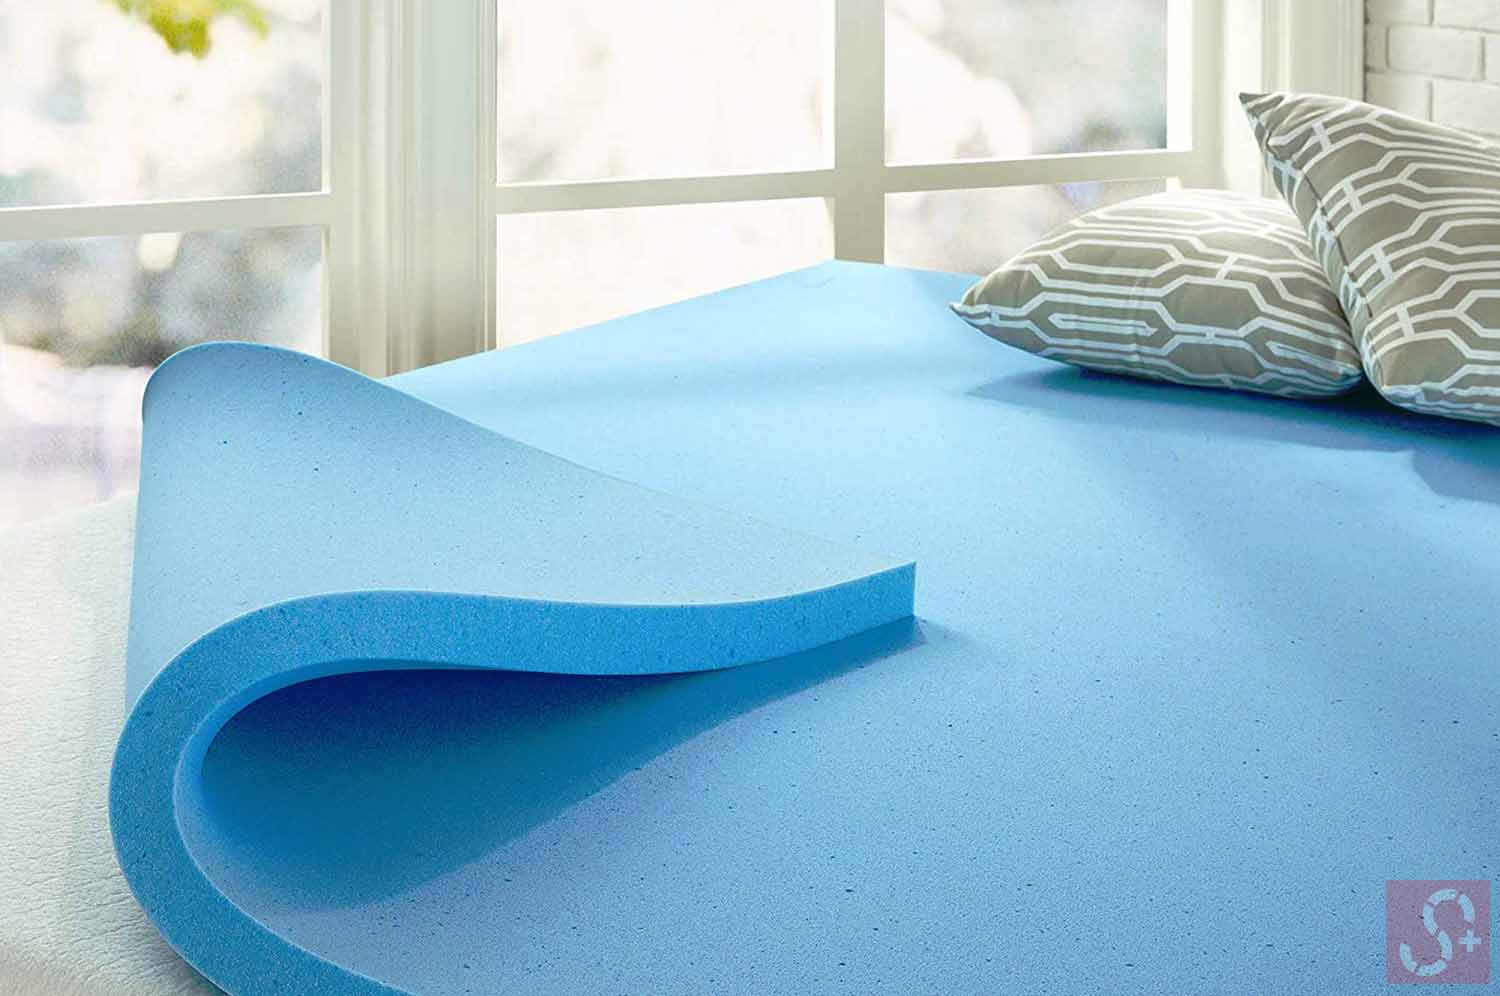 Mattress topper with two pillows inside a room